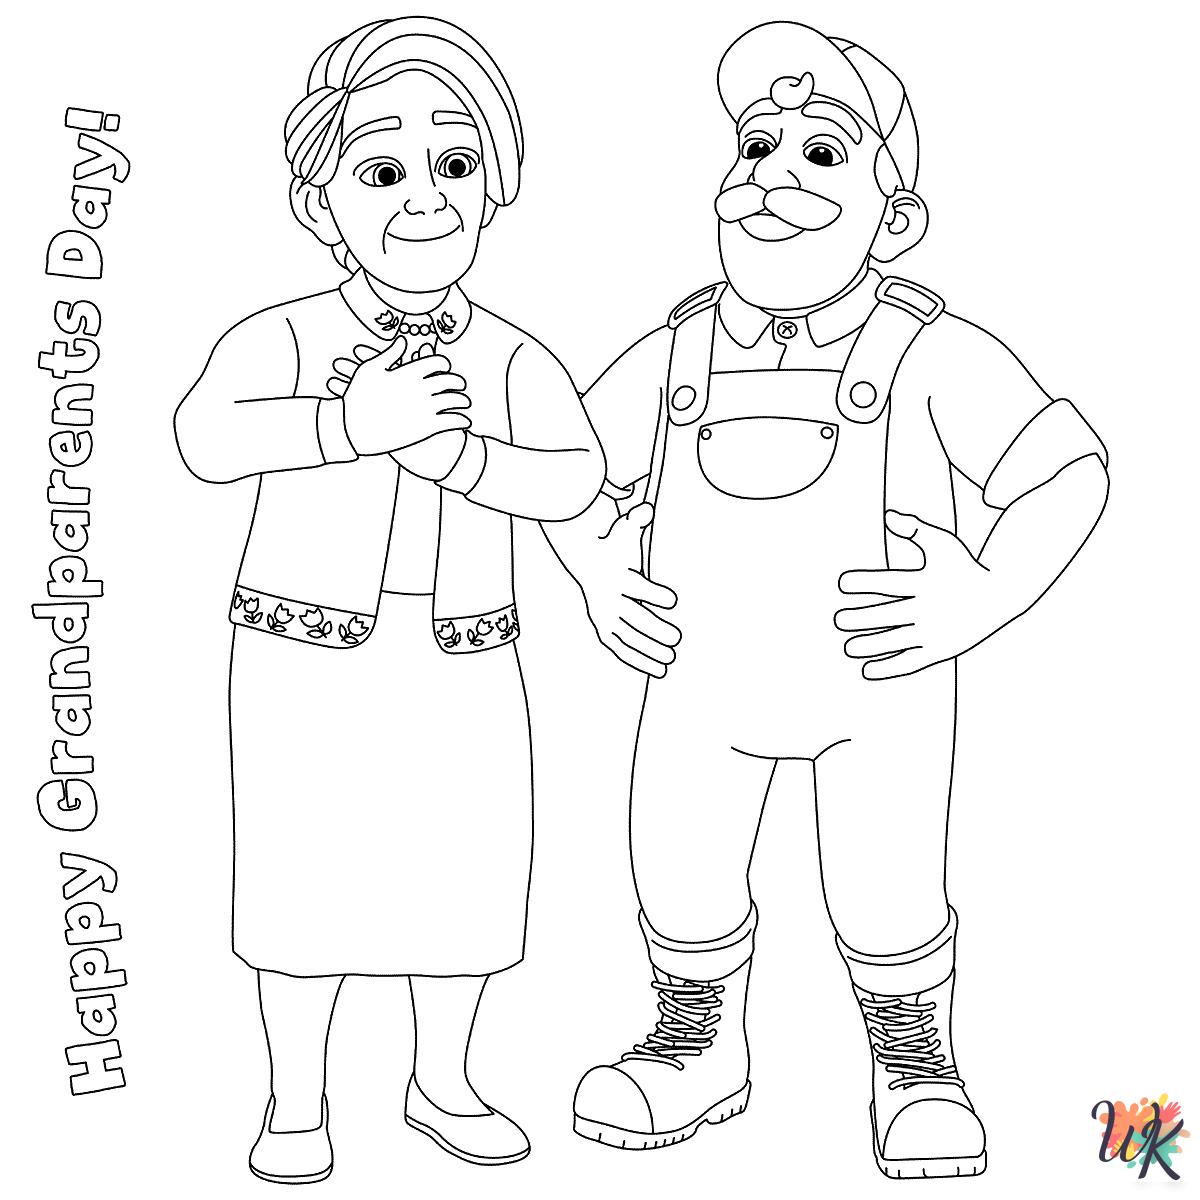 Cocomelon coloring pages for adults